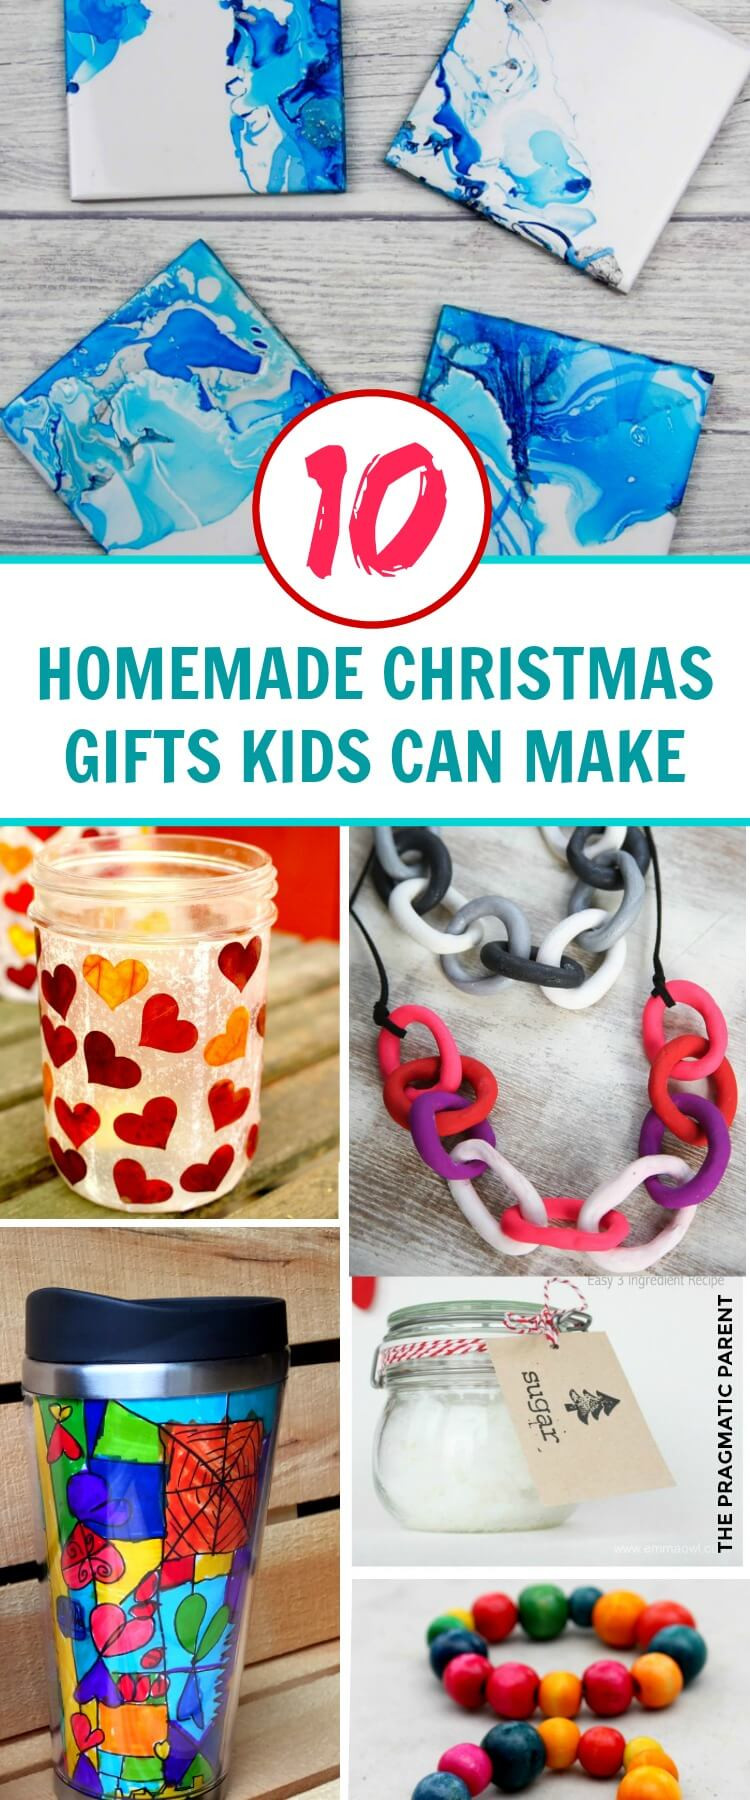 Handmade Gifts From Toddlers
 10 Beautiful Homemade Christmas Gifts Kids Can Make This 2020